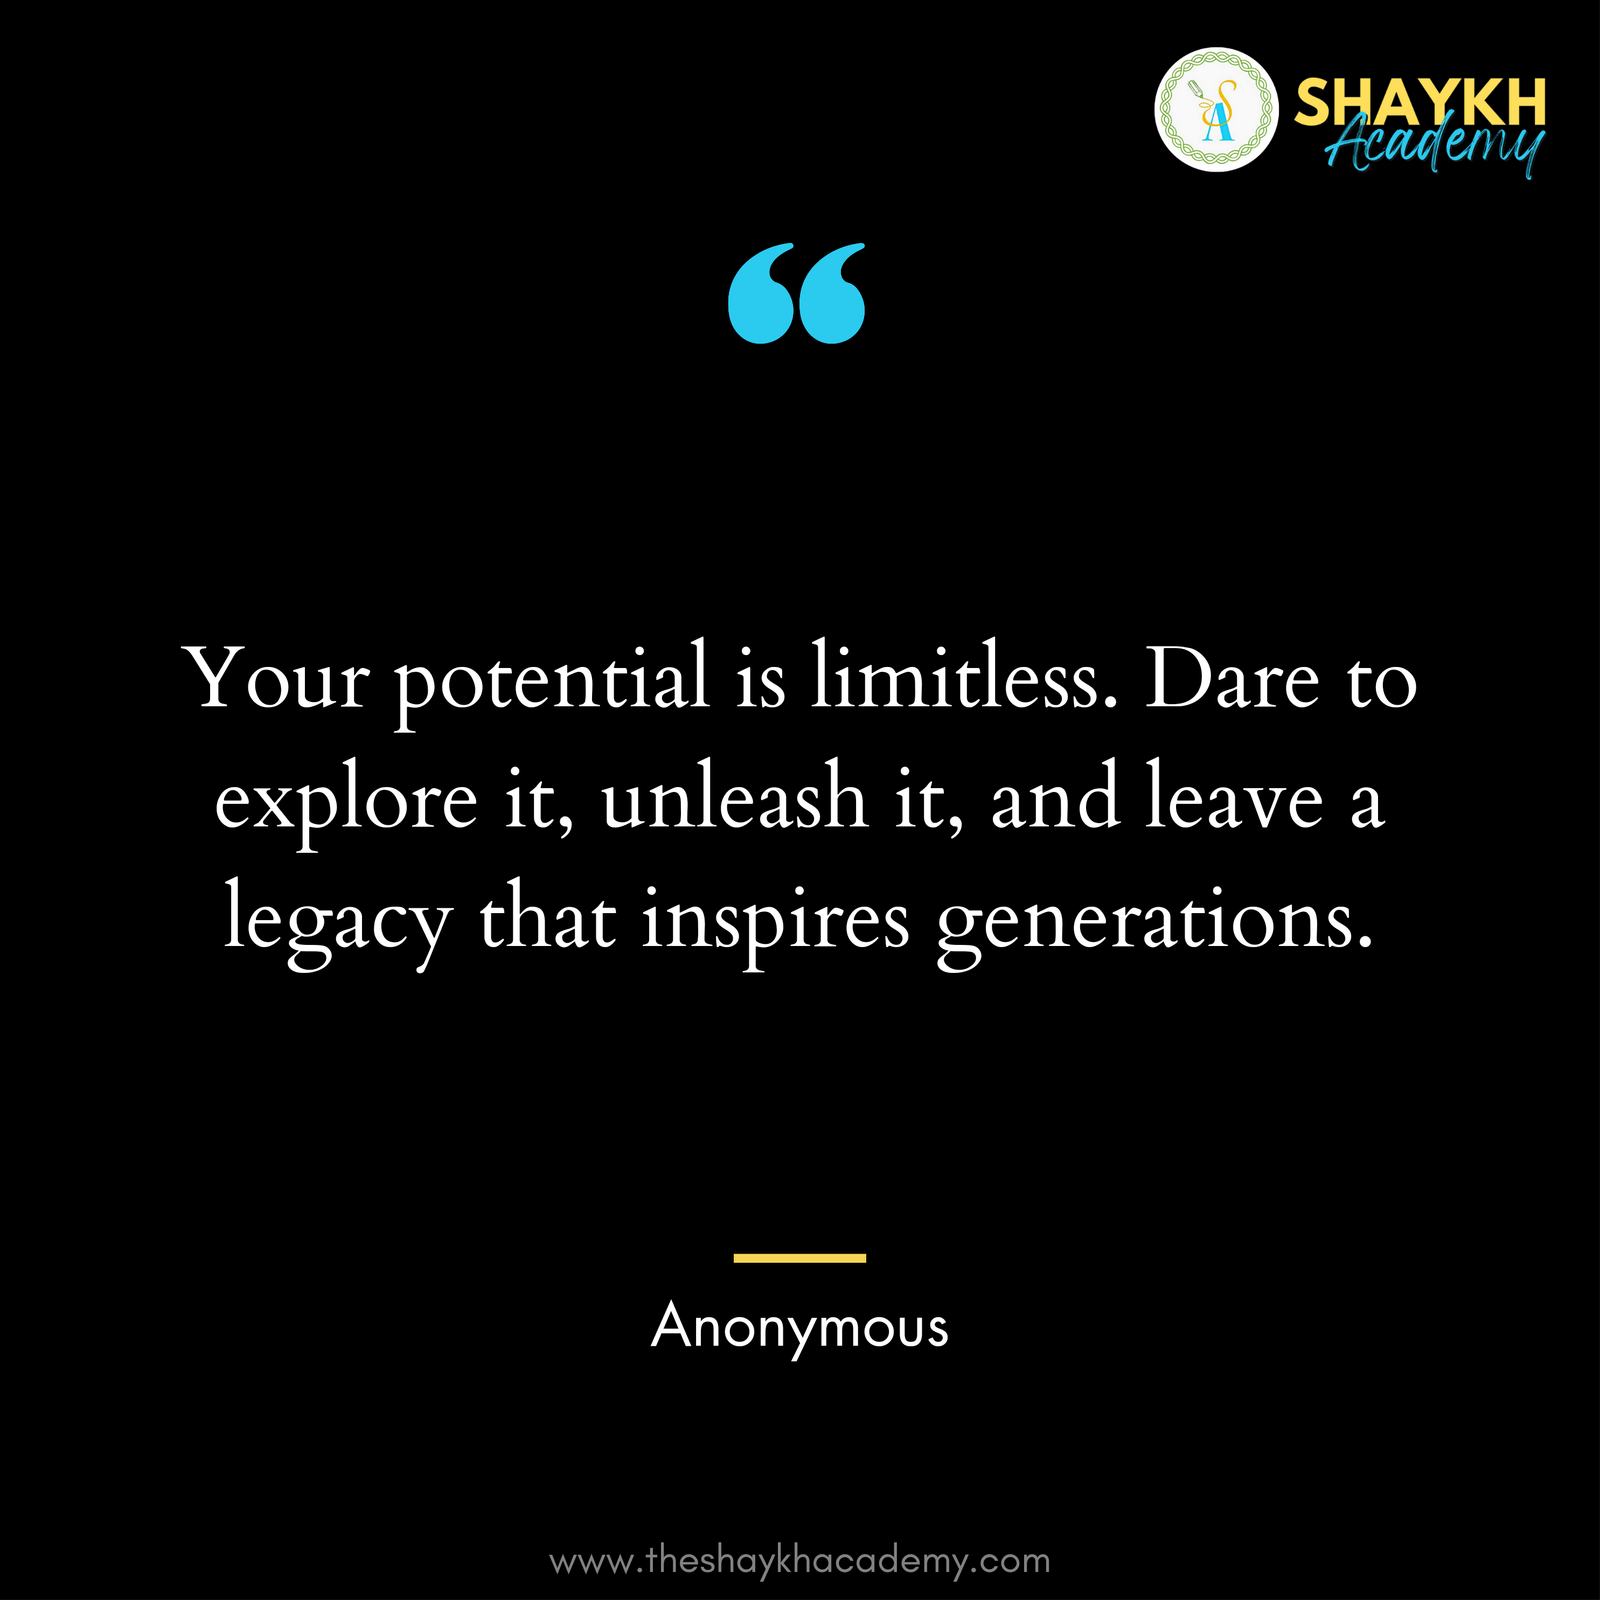 Your potential is limitless. Dare to explore it, unleash it, and leave a legacy that inspires generations.